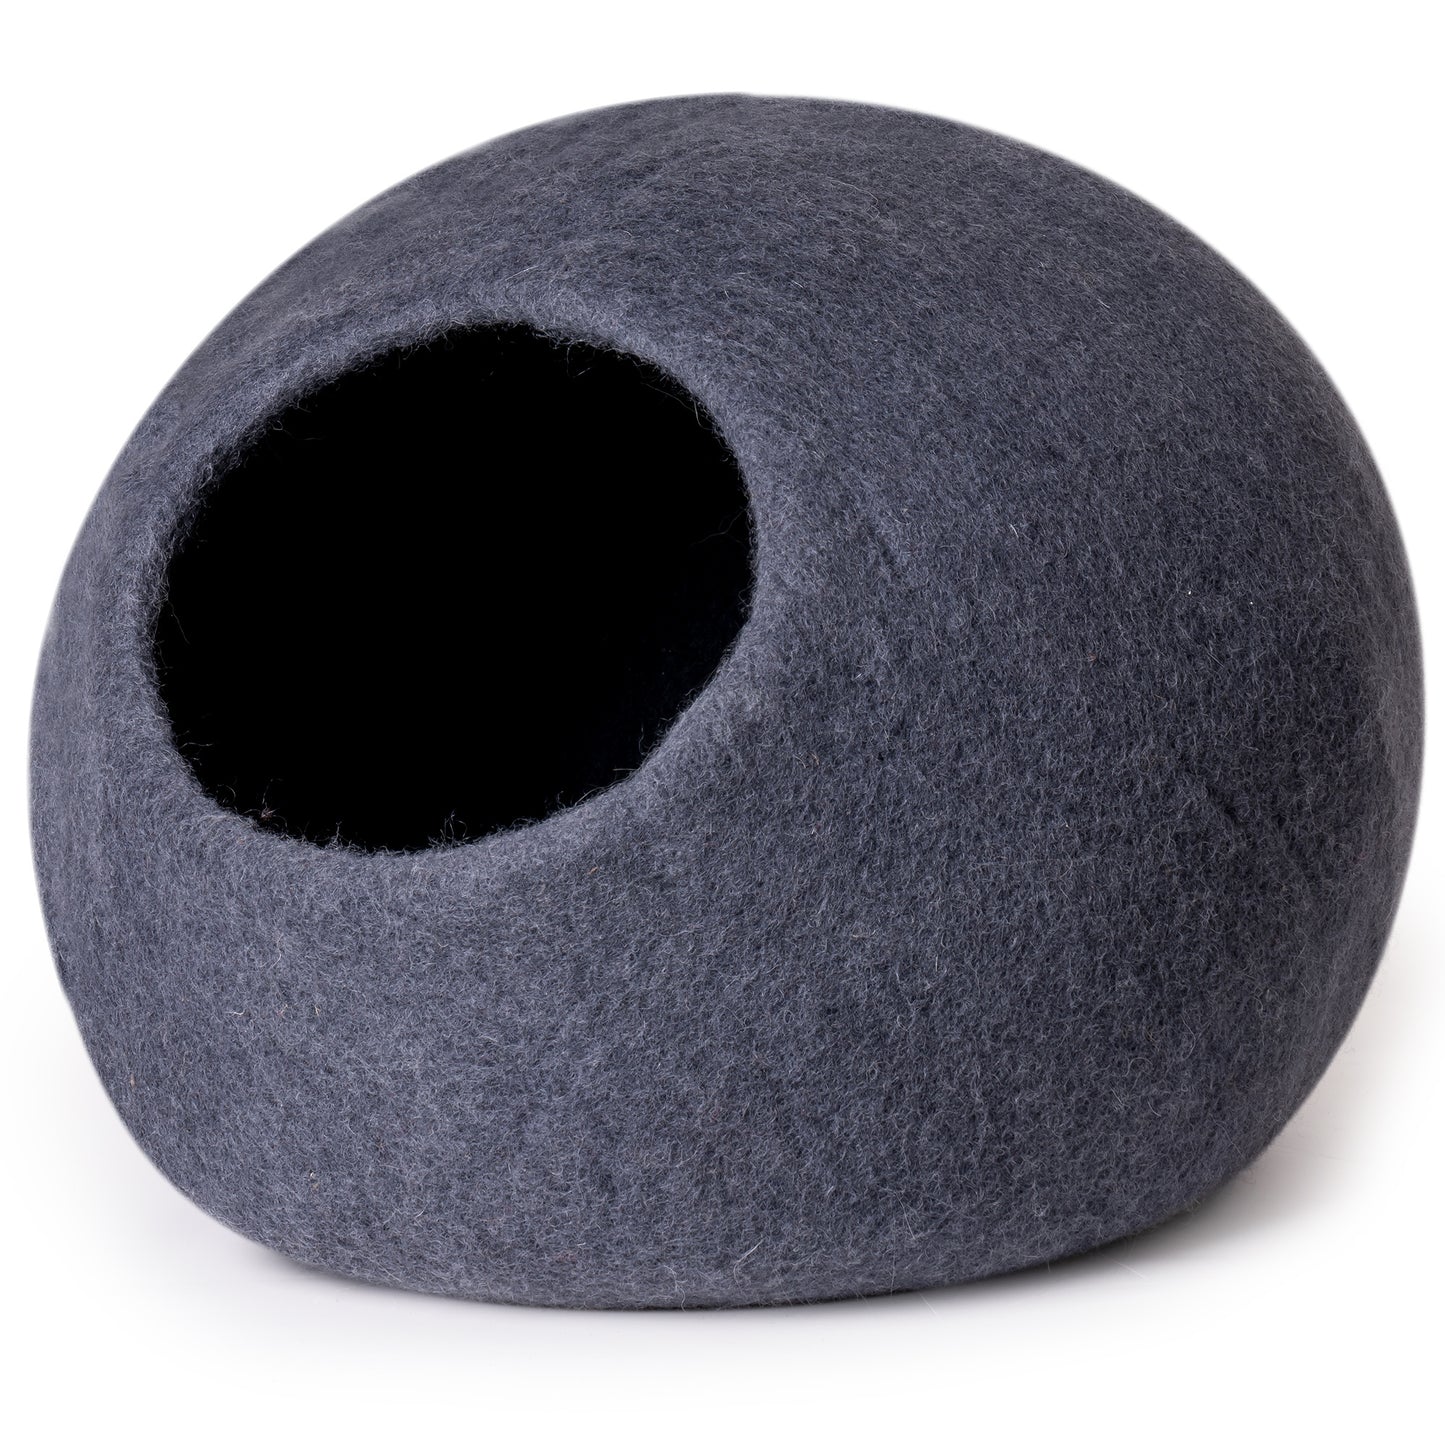 MewooFun Trendy Felt Cat Bed Cave Round Nest Wool Bed Gray for Cats and Kittens